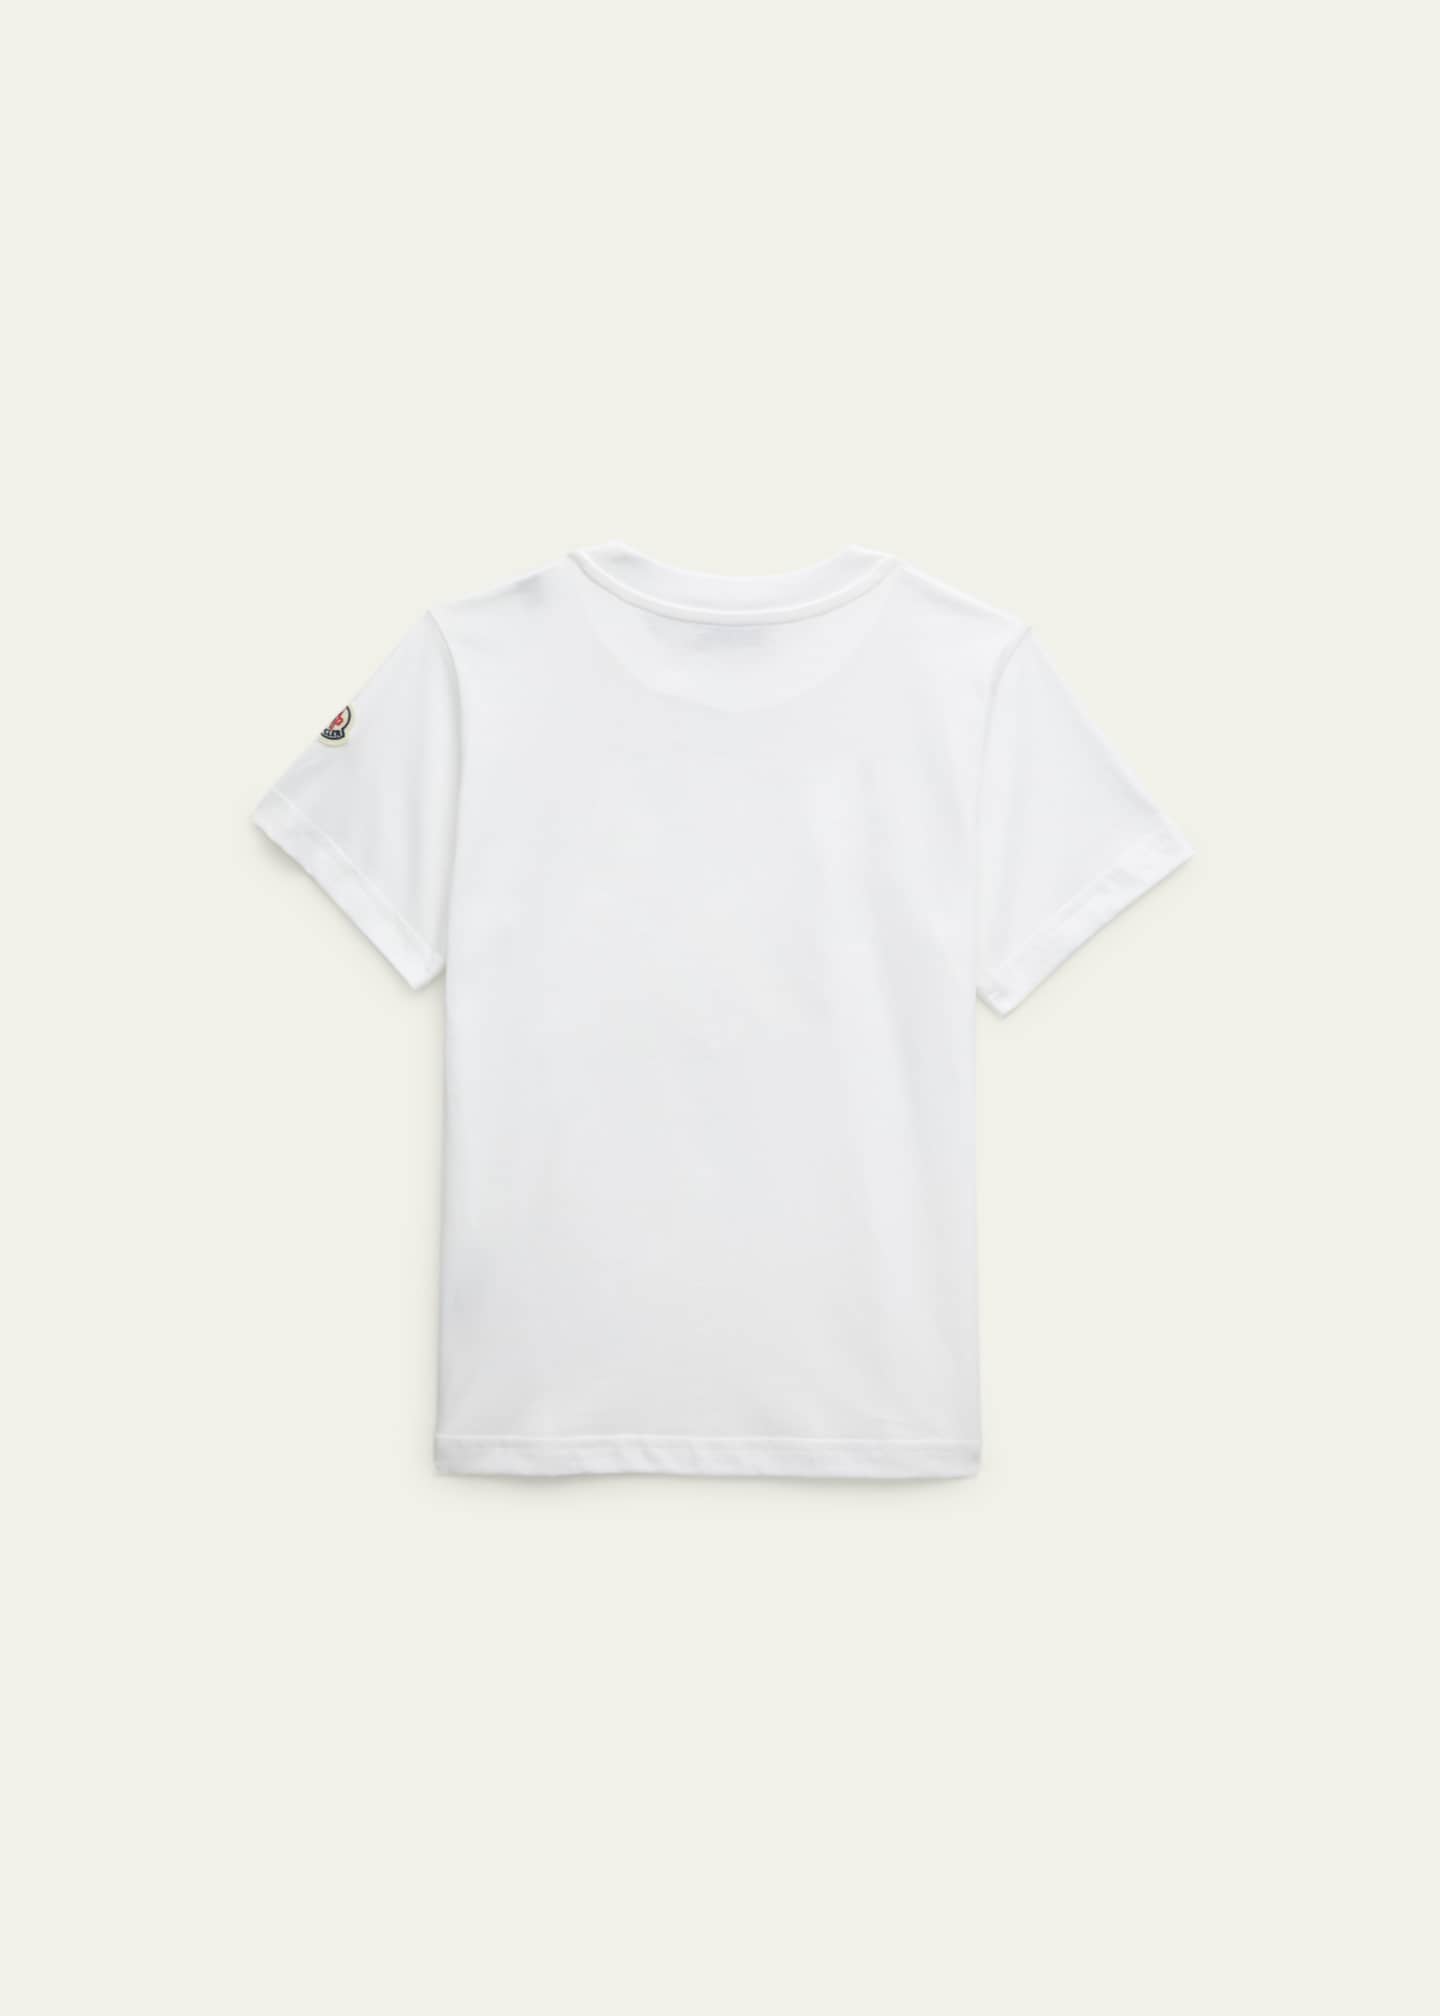 Moncler Boy's Embroidered Monogram T-Shirt, Size 4-14